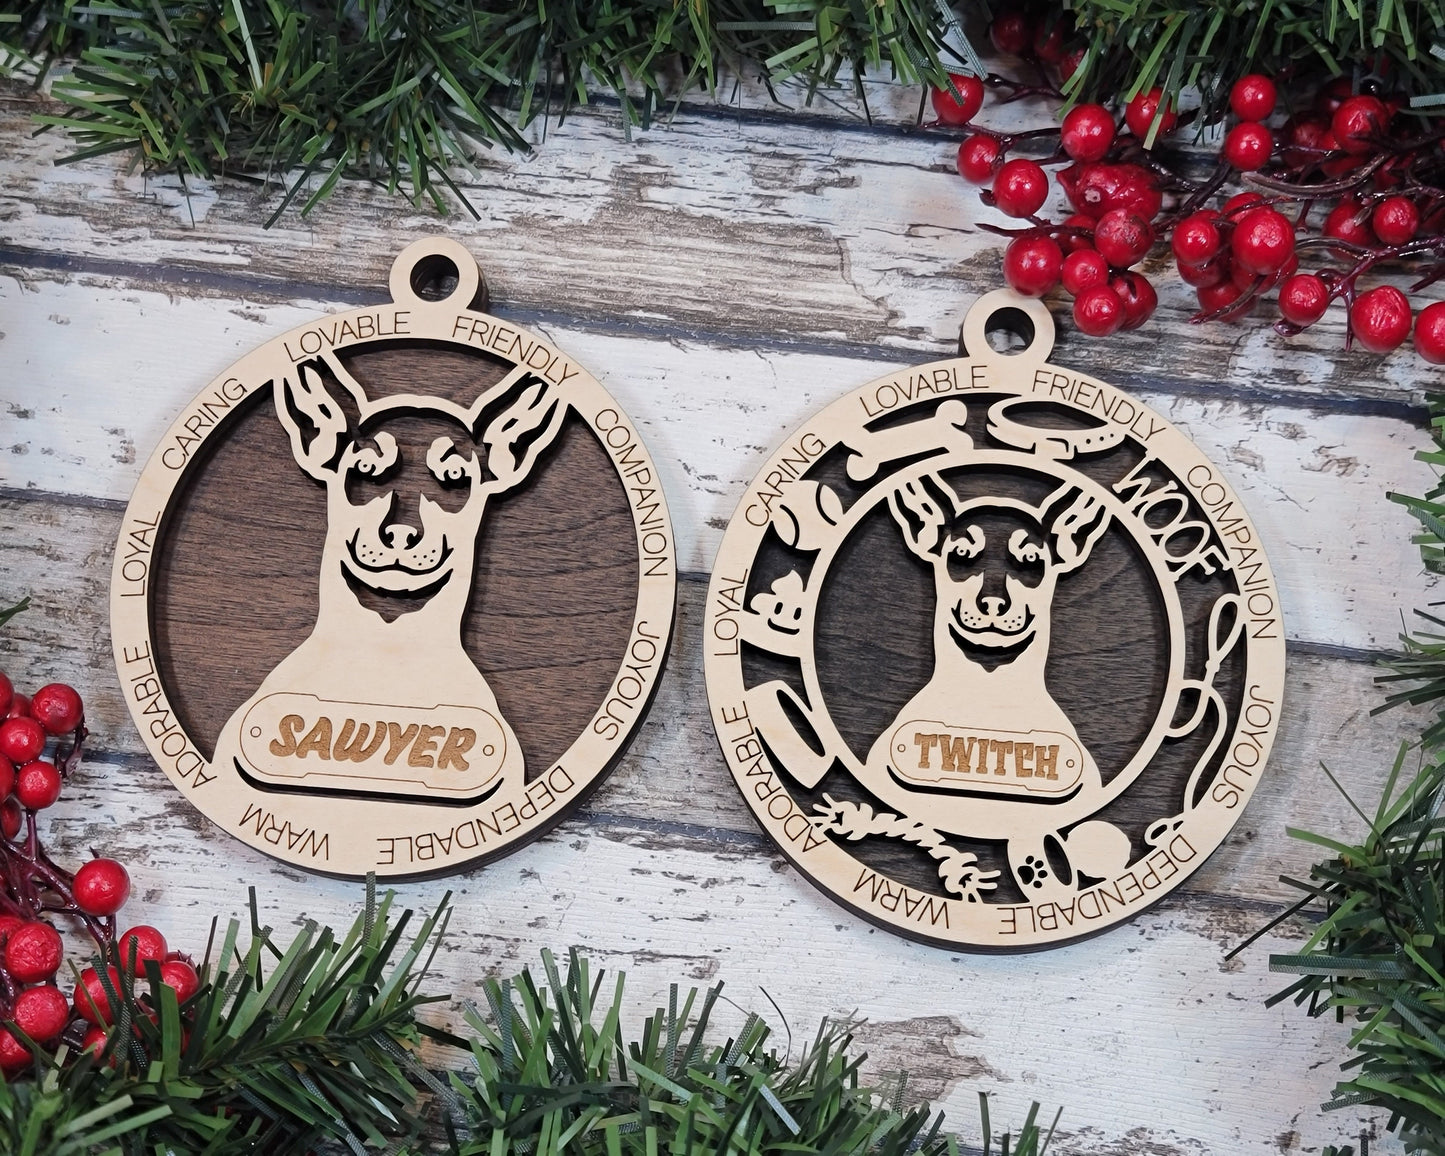 Miniature Pinscher - Adorable Dog Ornaments - 2 Ornaments included - SVG, PDF, AI File Download - Sized for Glowforge